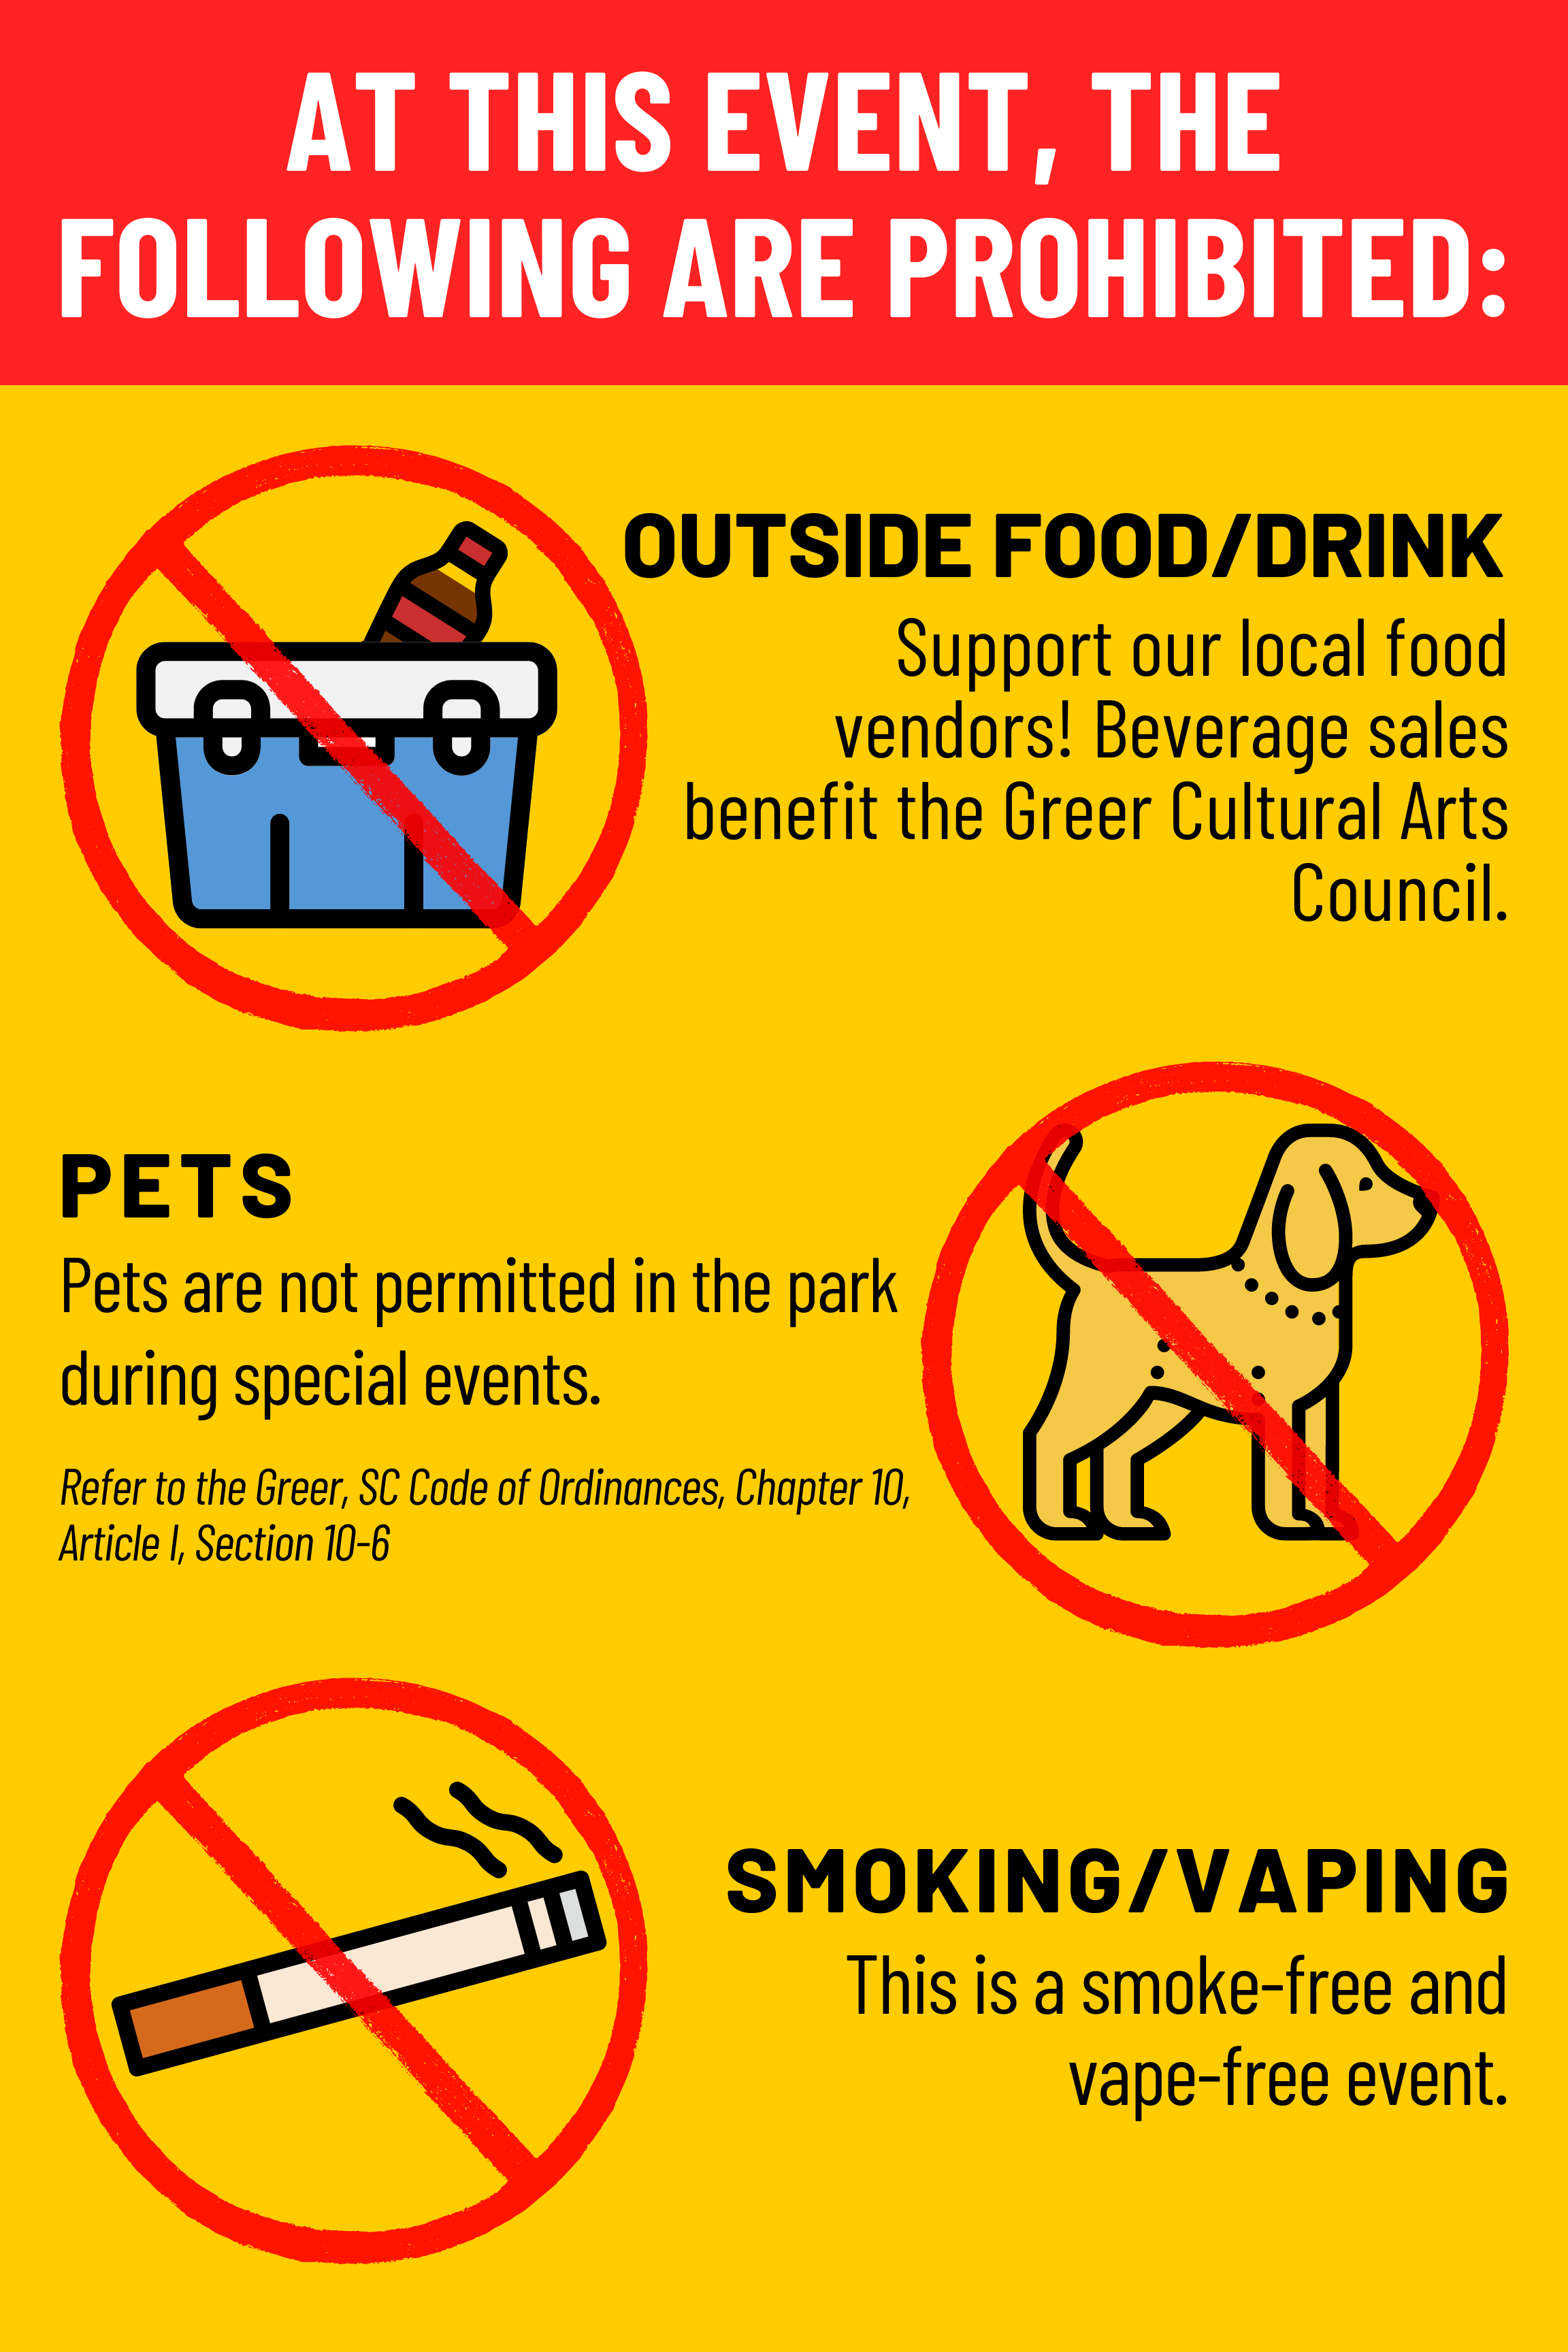 an image detailing what not to bring to the event. No outside food/drink, no pets, and no smoking.vaping